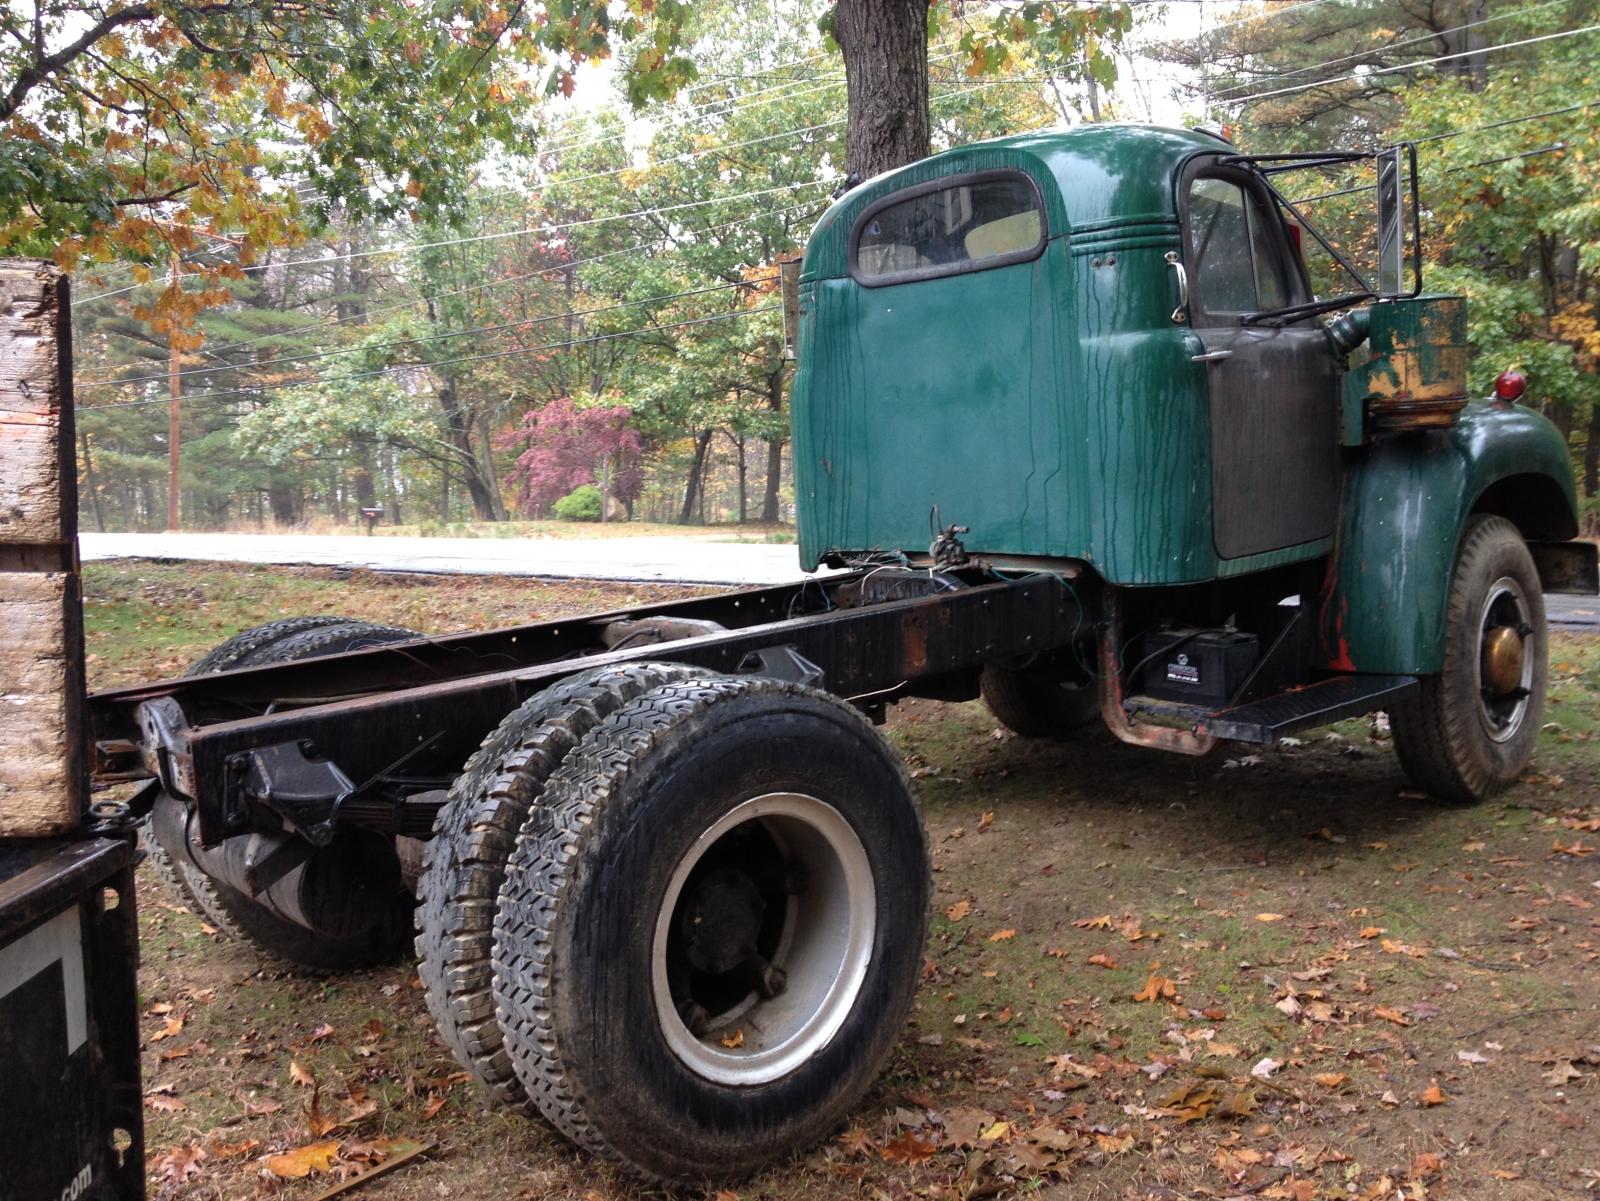 Spotted B46 for sale in Maine while on vacation - Antique and Classic Mack Trucks General ...